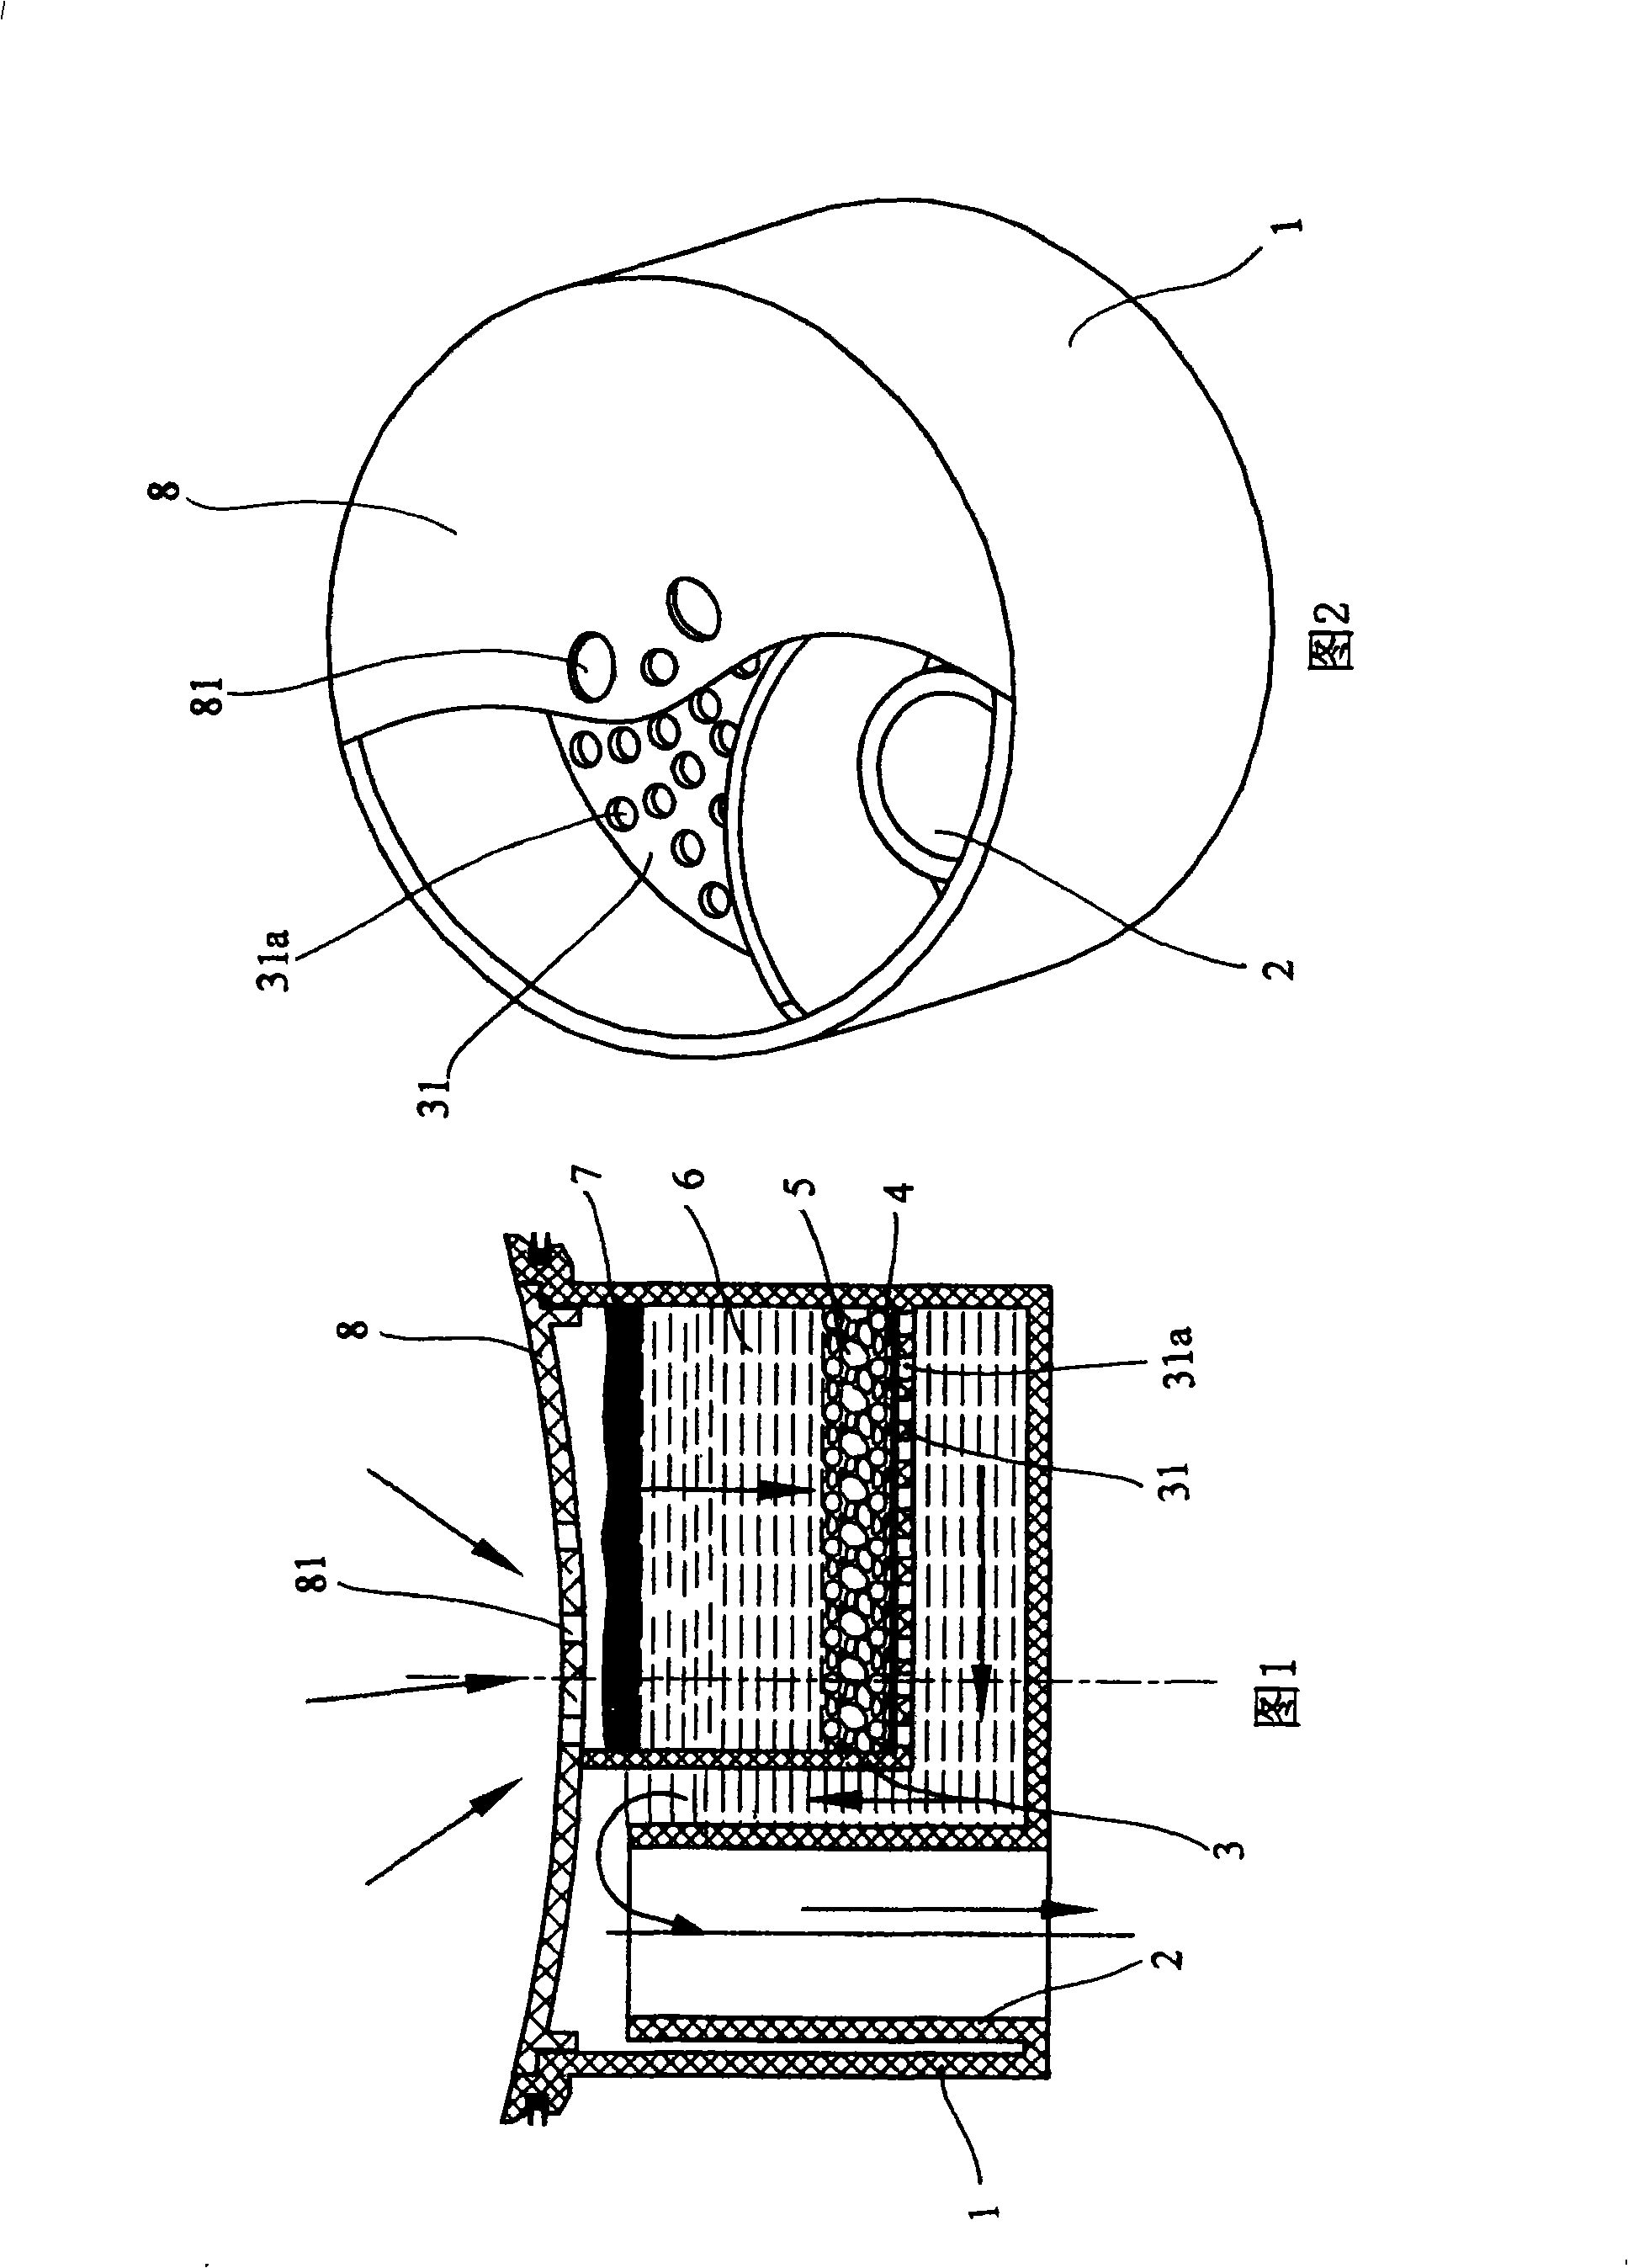 Flush-proof filtration apparatus for vertical urinal